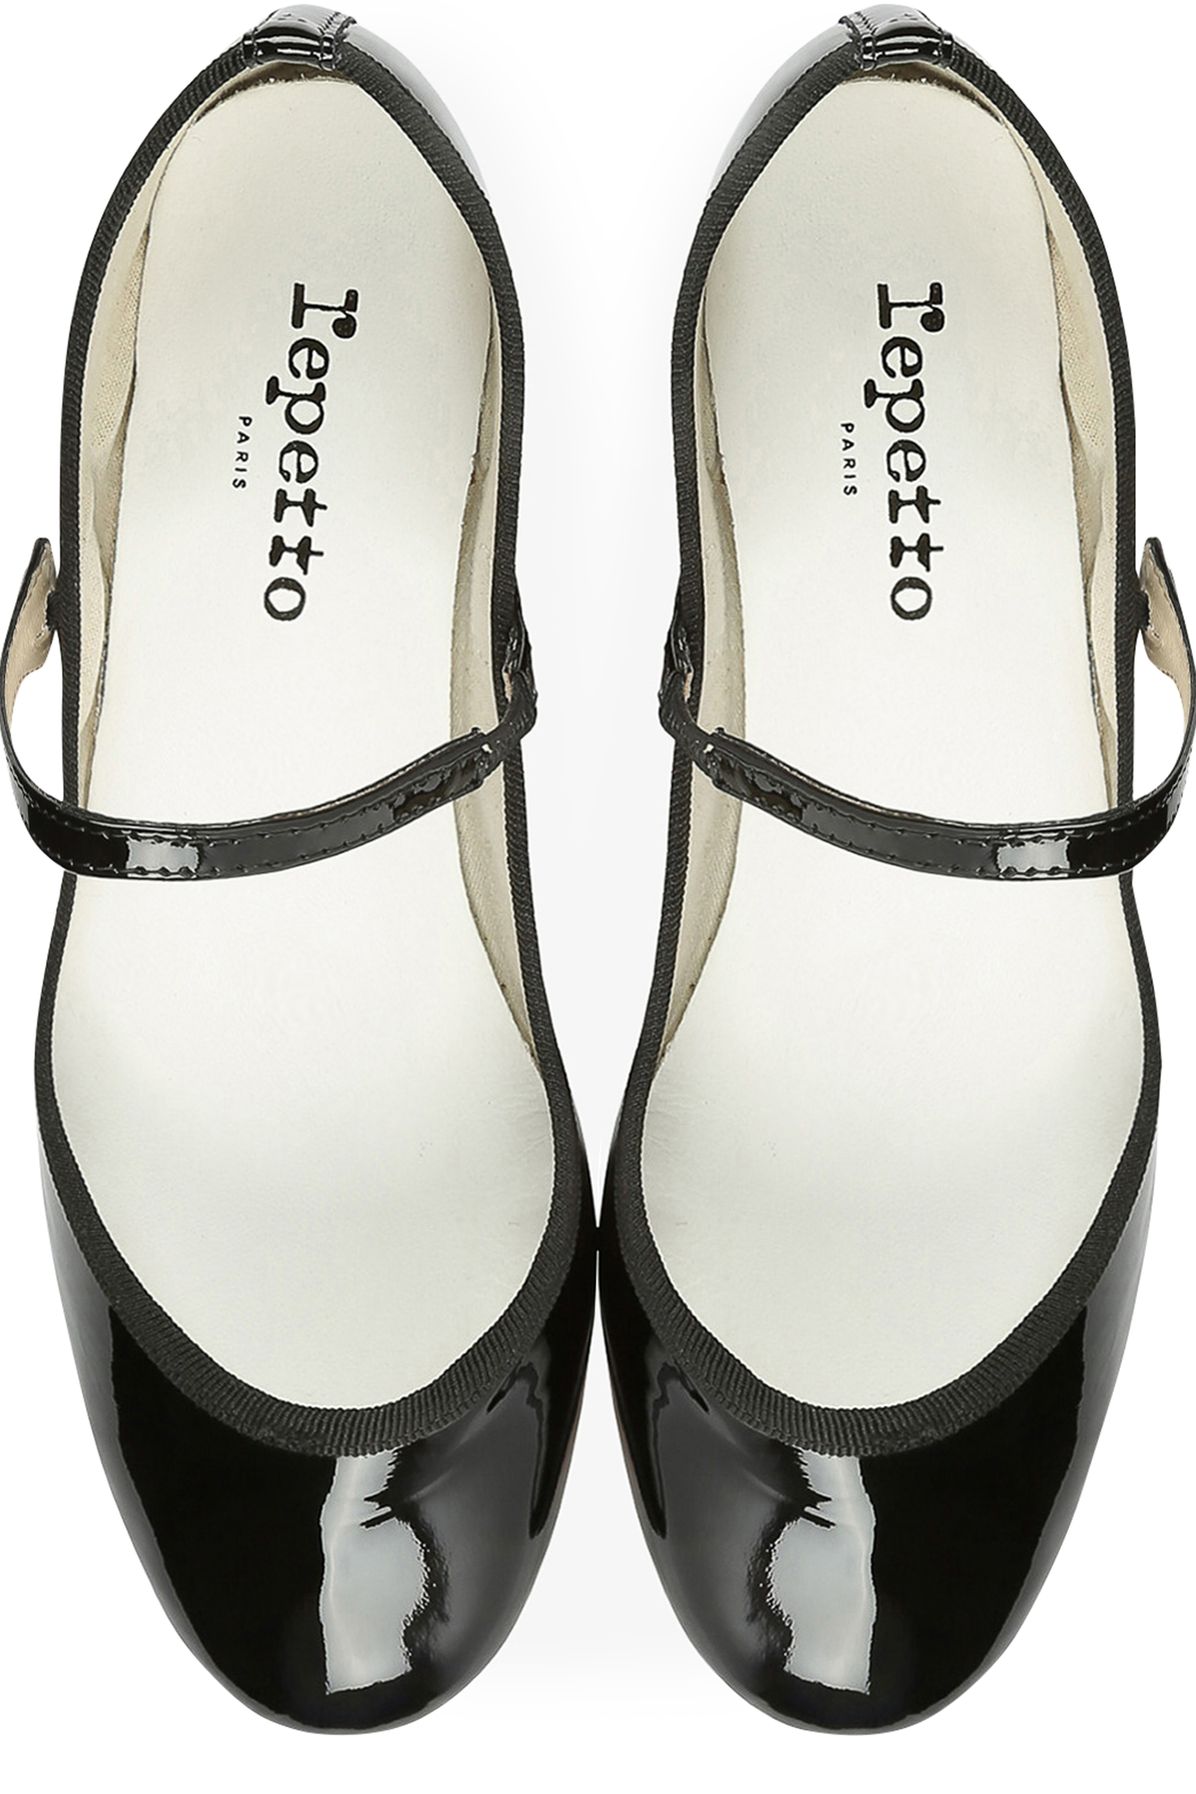 repetto Rose Mary Jane shoes